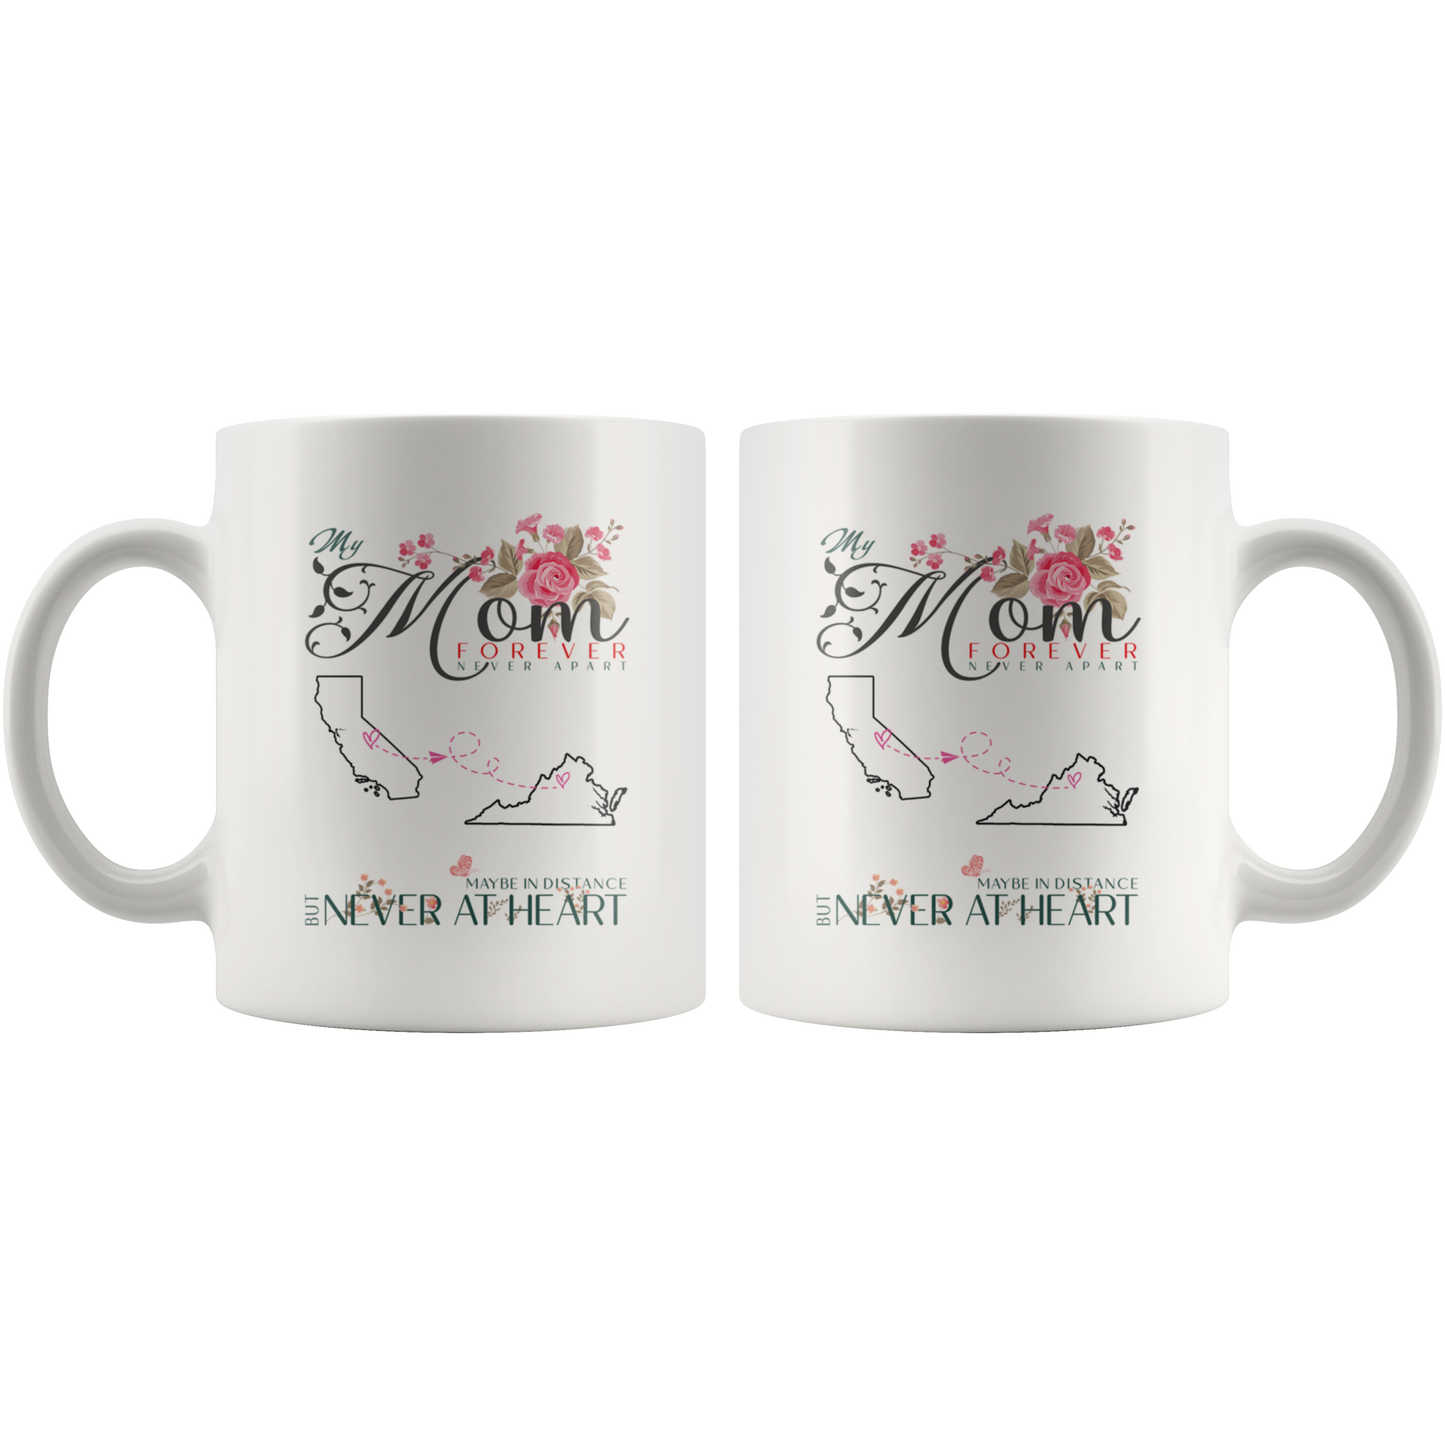 M-20321571-sp-23560 - [ California | Virginia ]Personalized Mothers Day Coffee Mug - My Mom Forever Never A